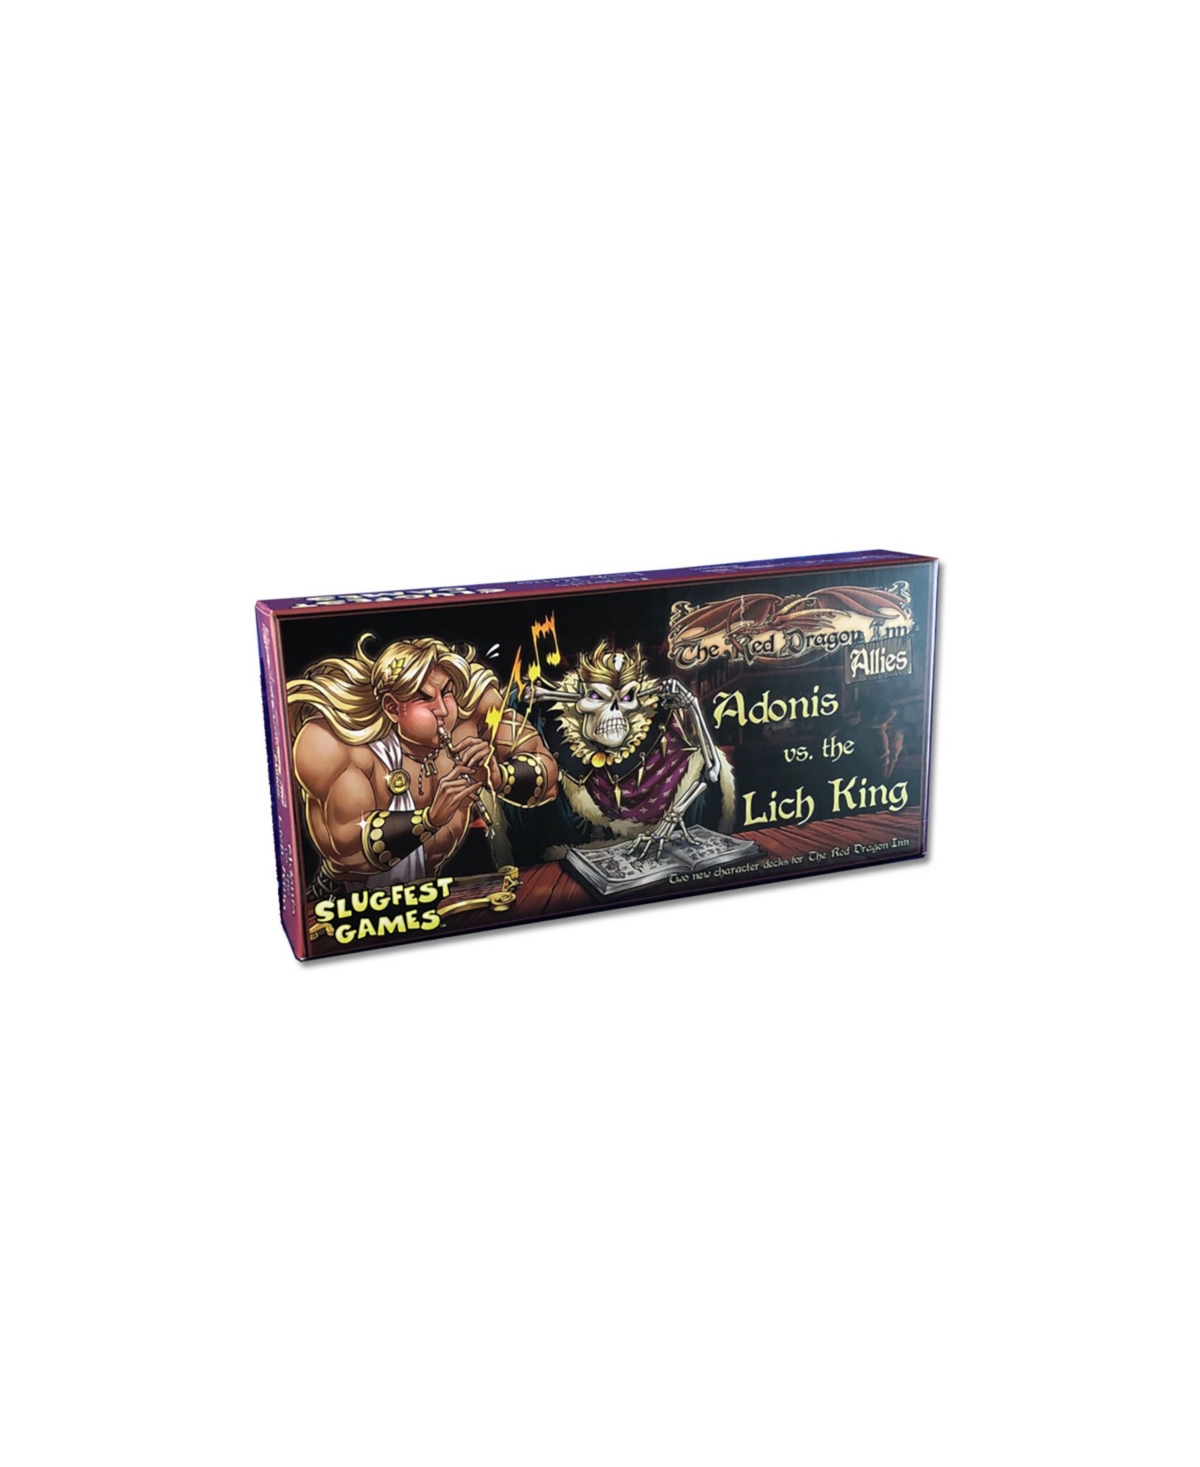 Shop Masterpieces Puzzles Slugfest Games The Red Dragon Inn Allies In Multi